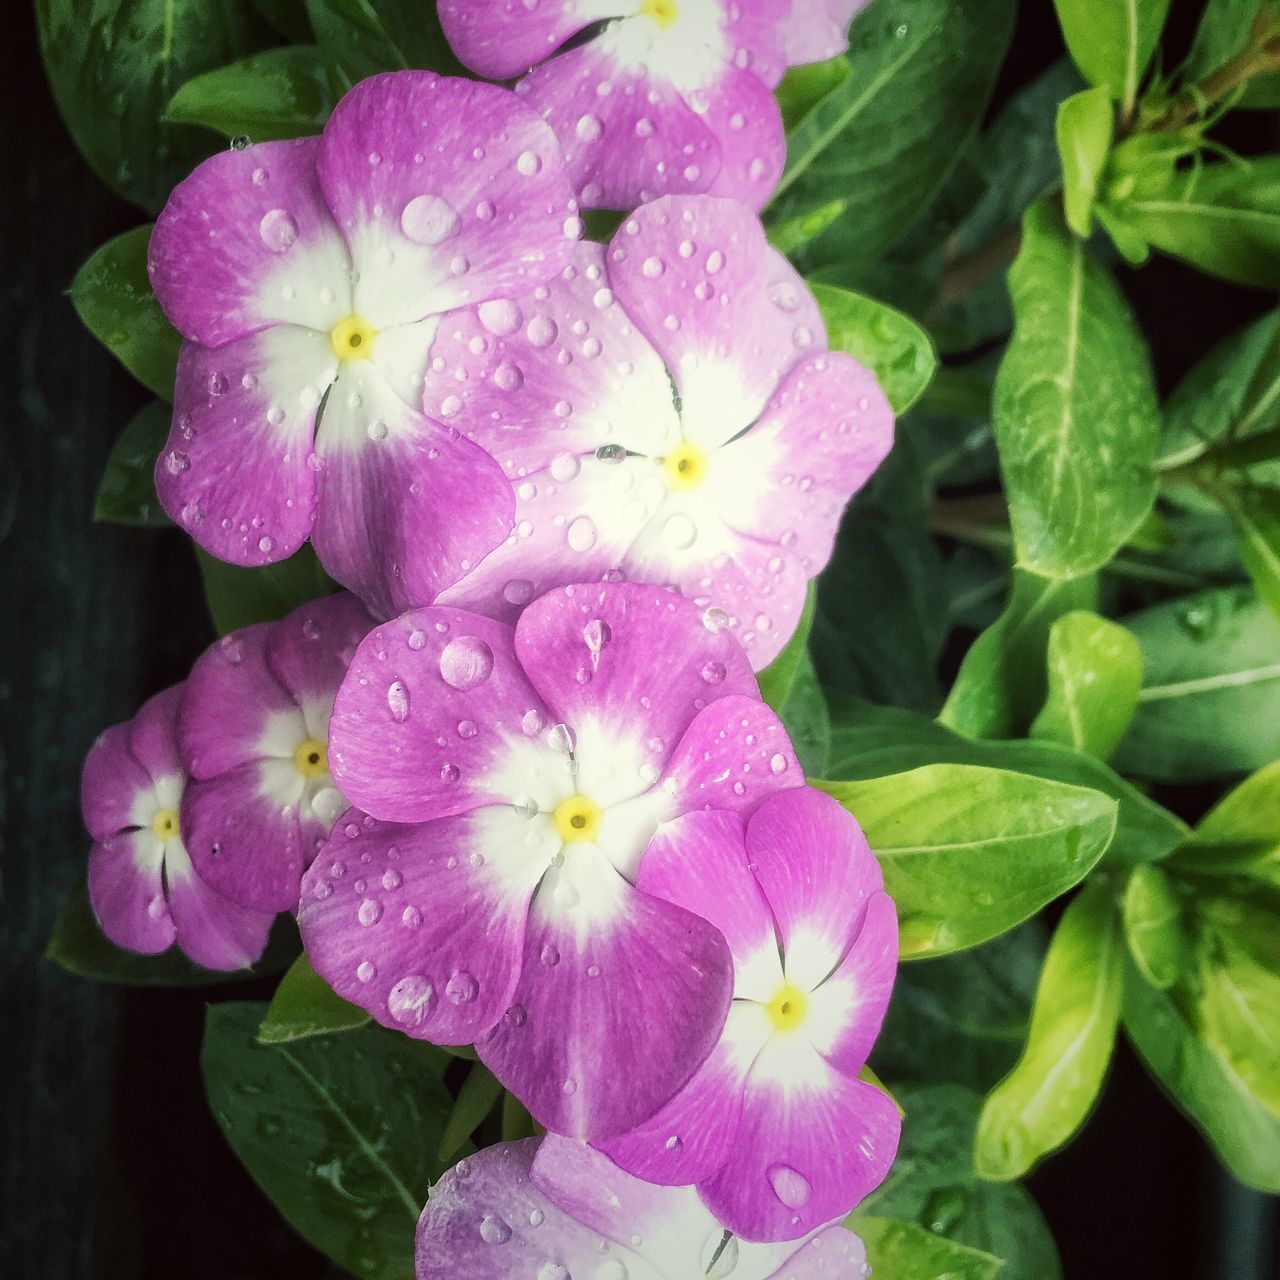 flower, freshness, petal, fragility, flower head, beauty in nature, growth, drop, water, close-up, nature, blooming, wet, purple, pink color, plant, leaf, in bloom, high angle view, pollen